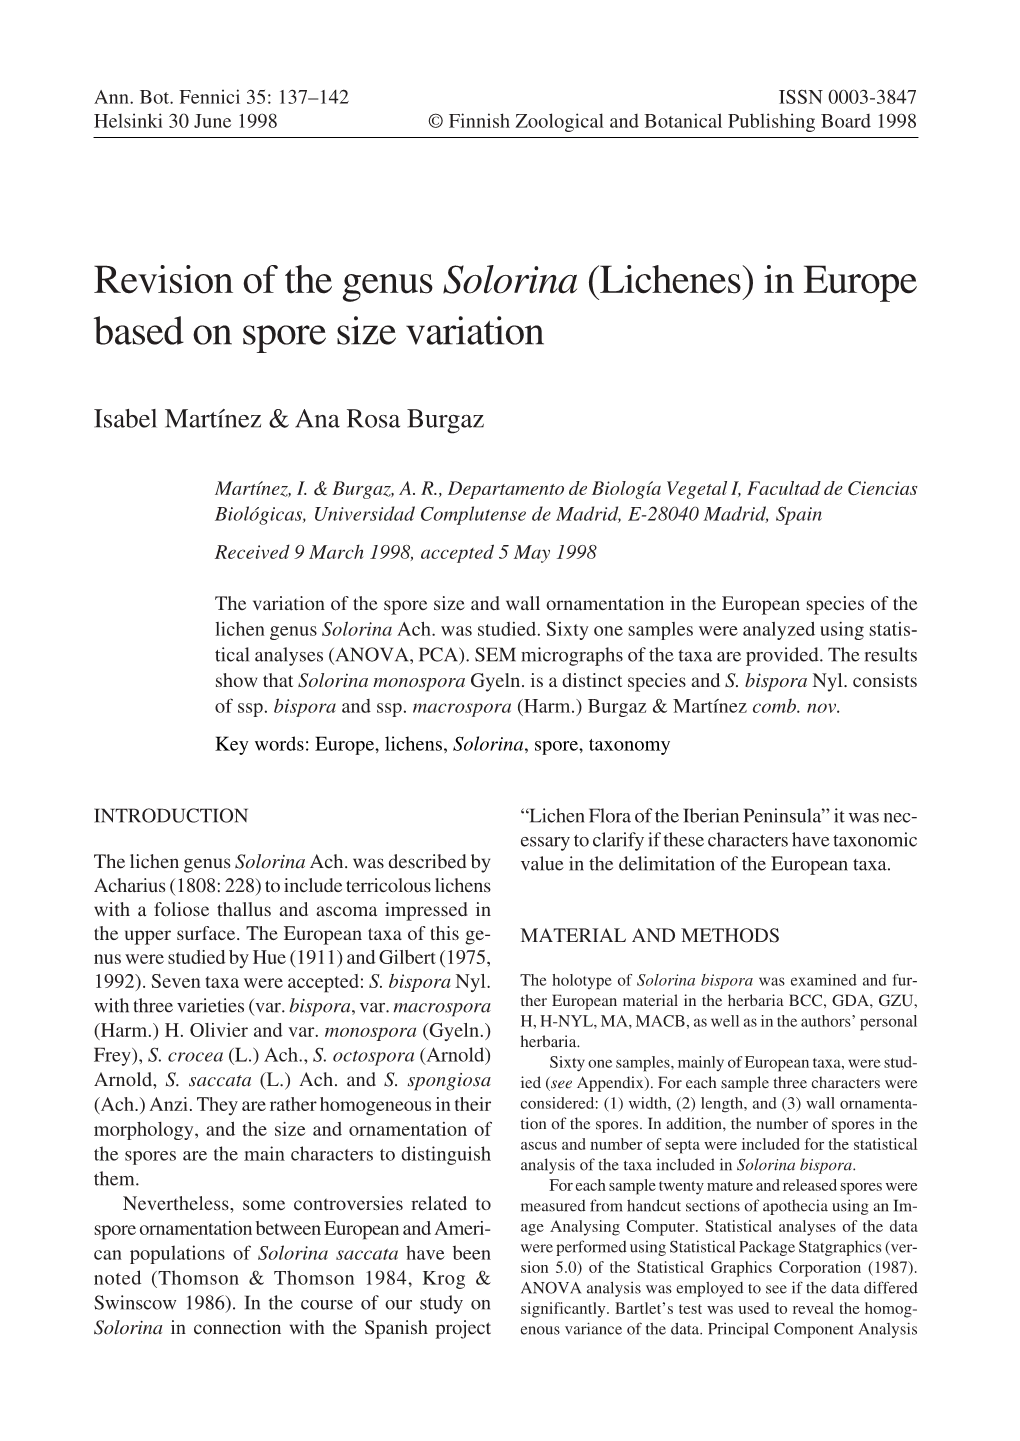 Revision of the Genus Solorina (Lichenes) in Europe Based on Spore Size Variation